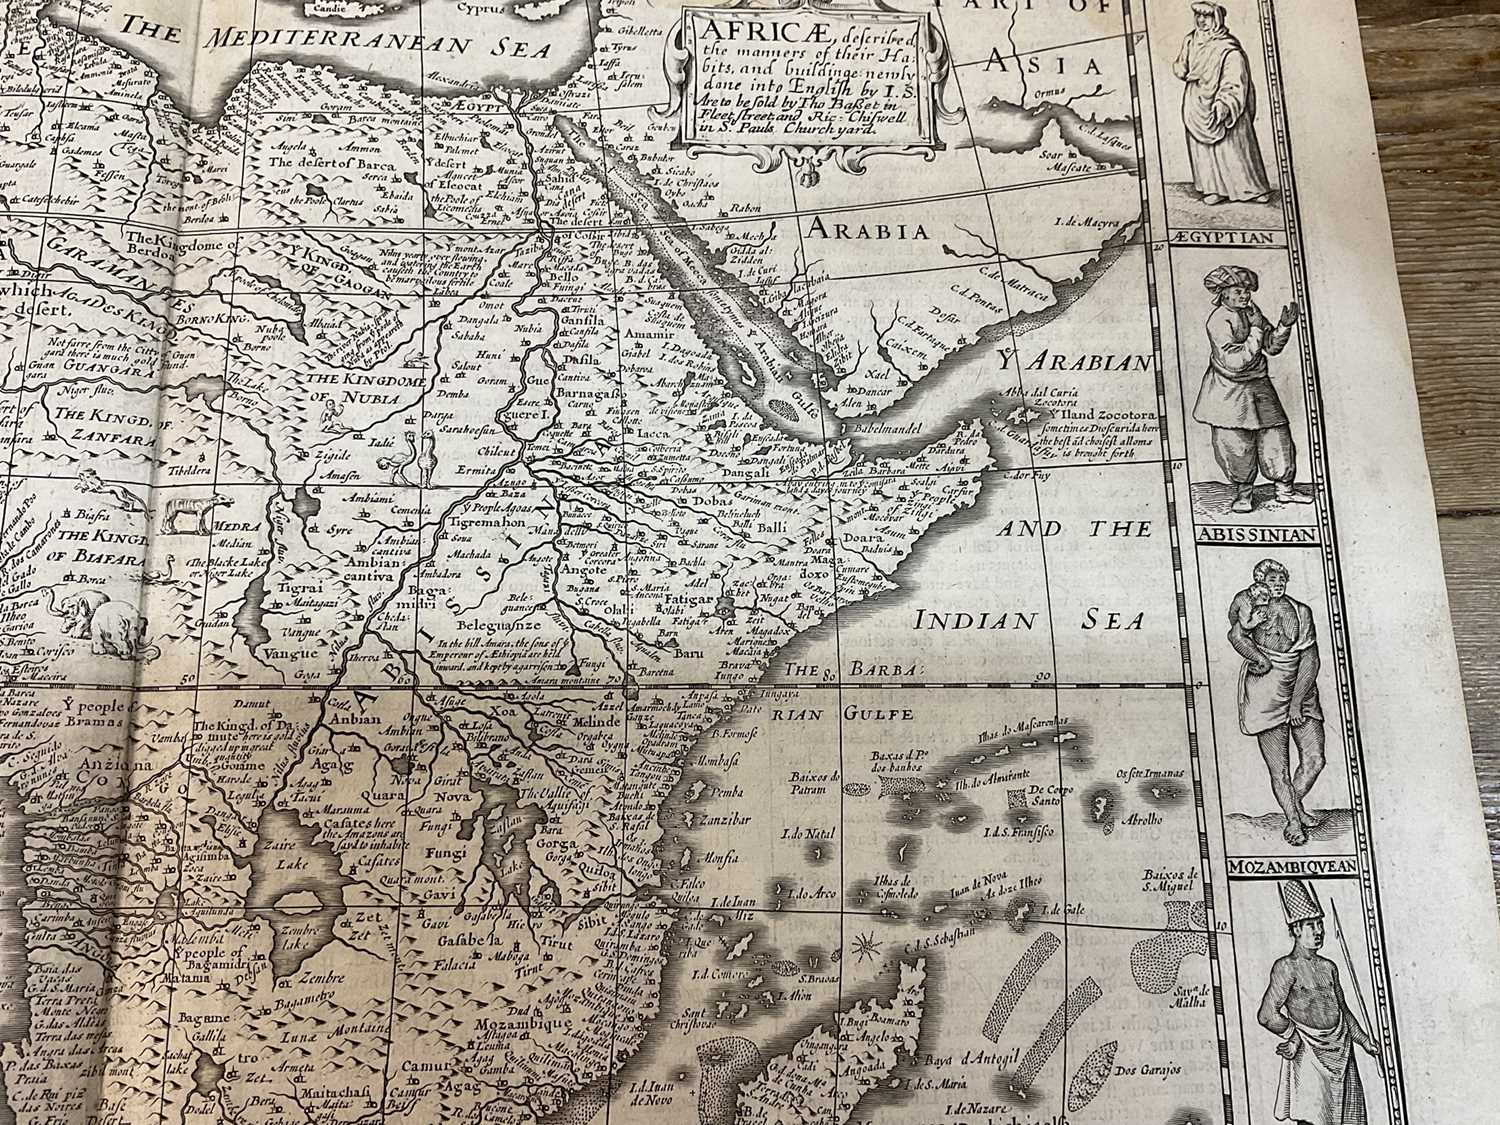 John Speed 17th century engraved map of Africa - Image 8 of 12